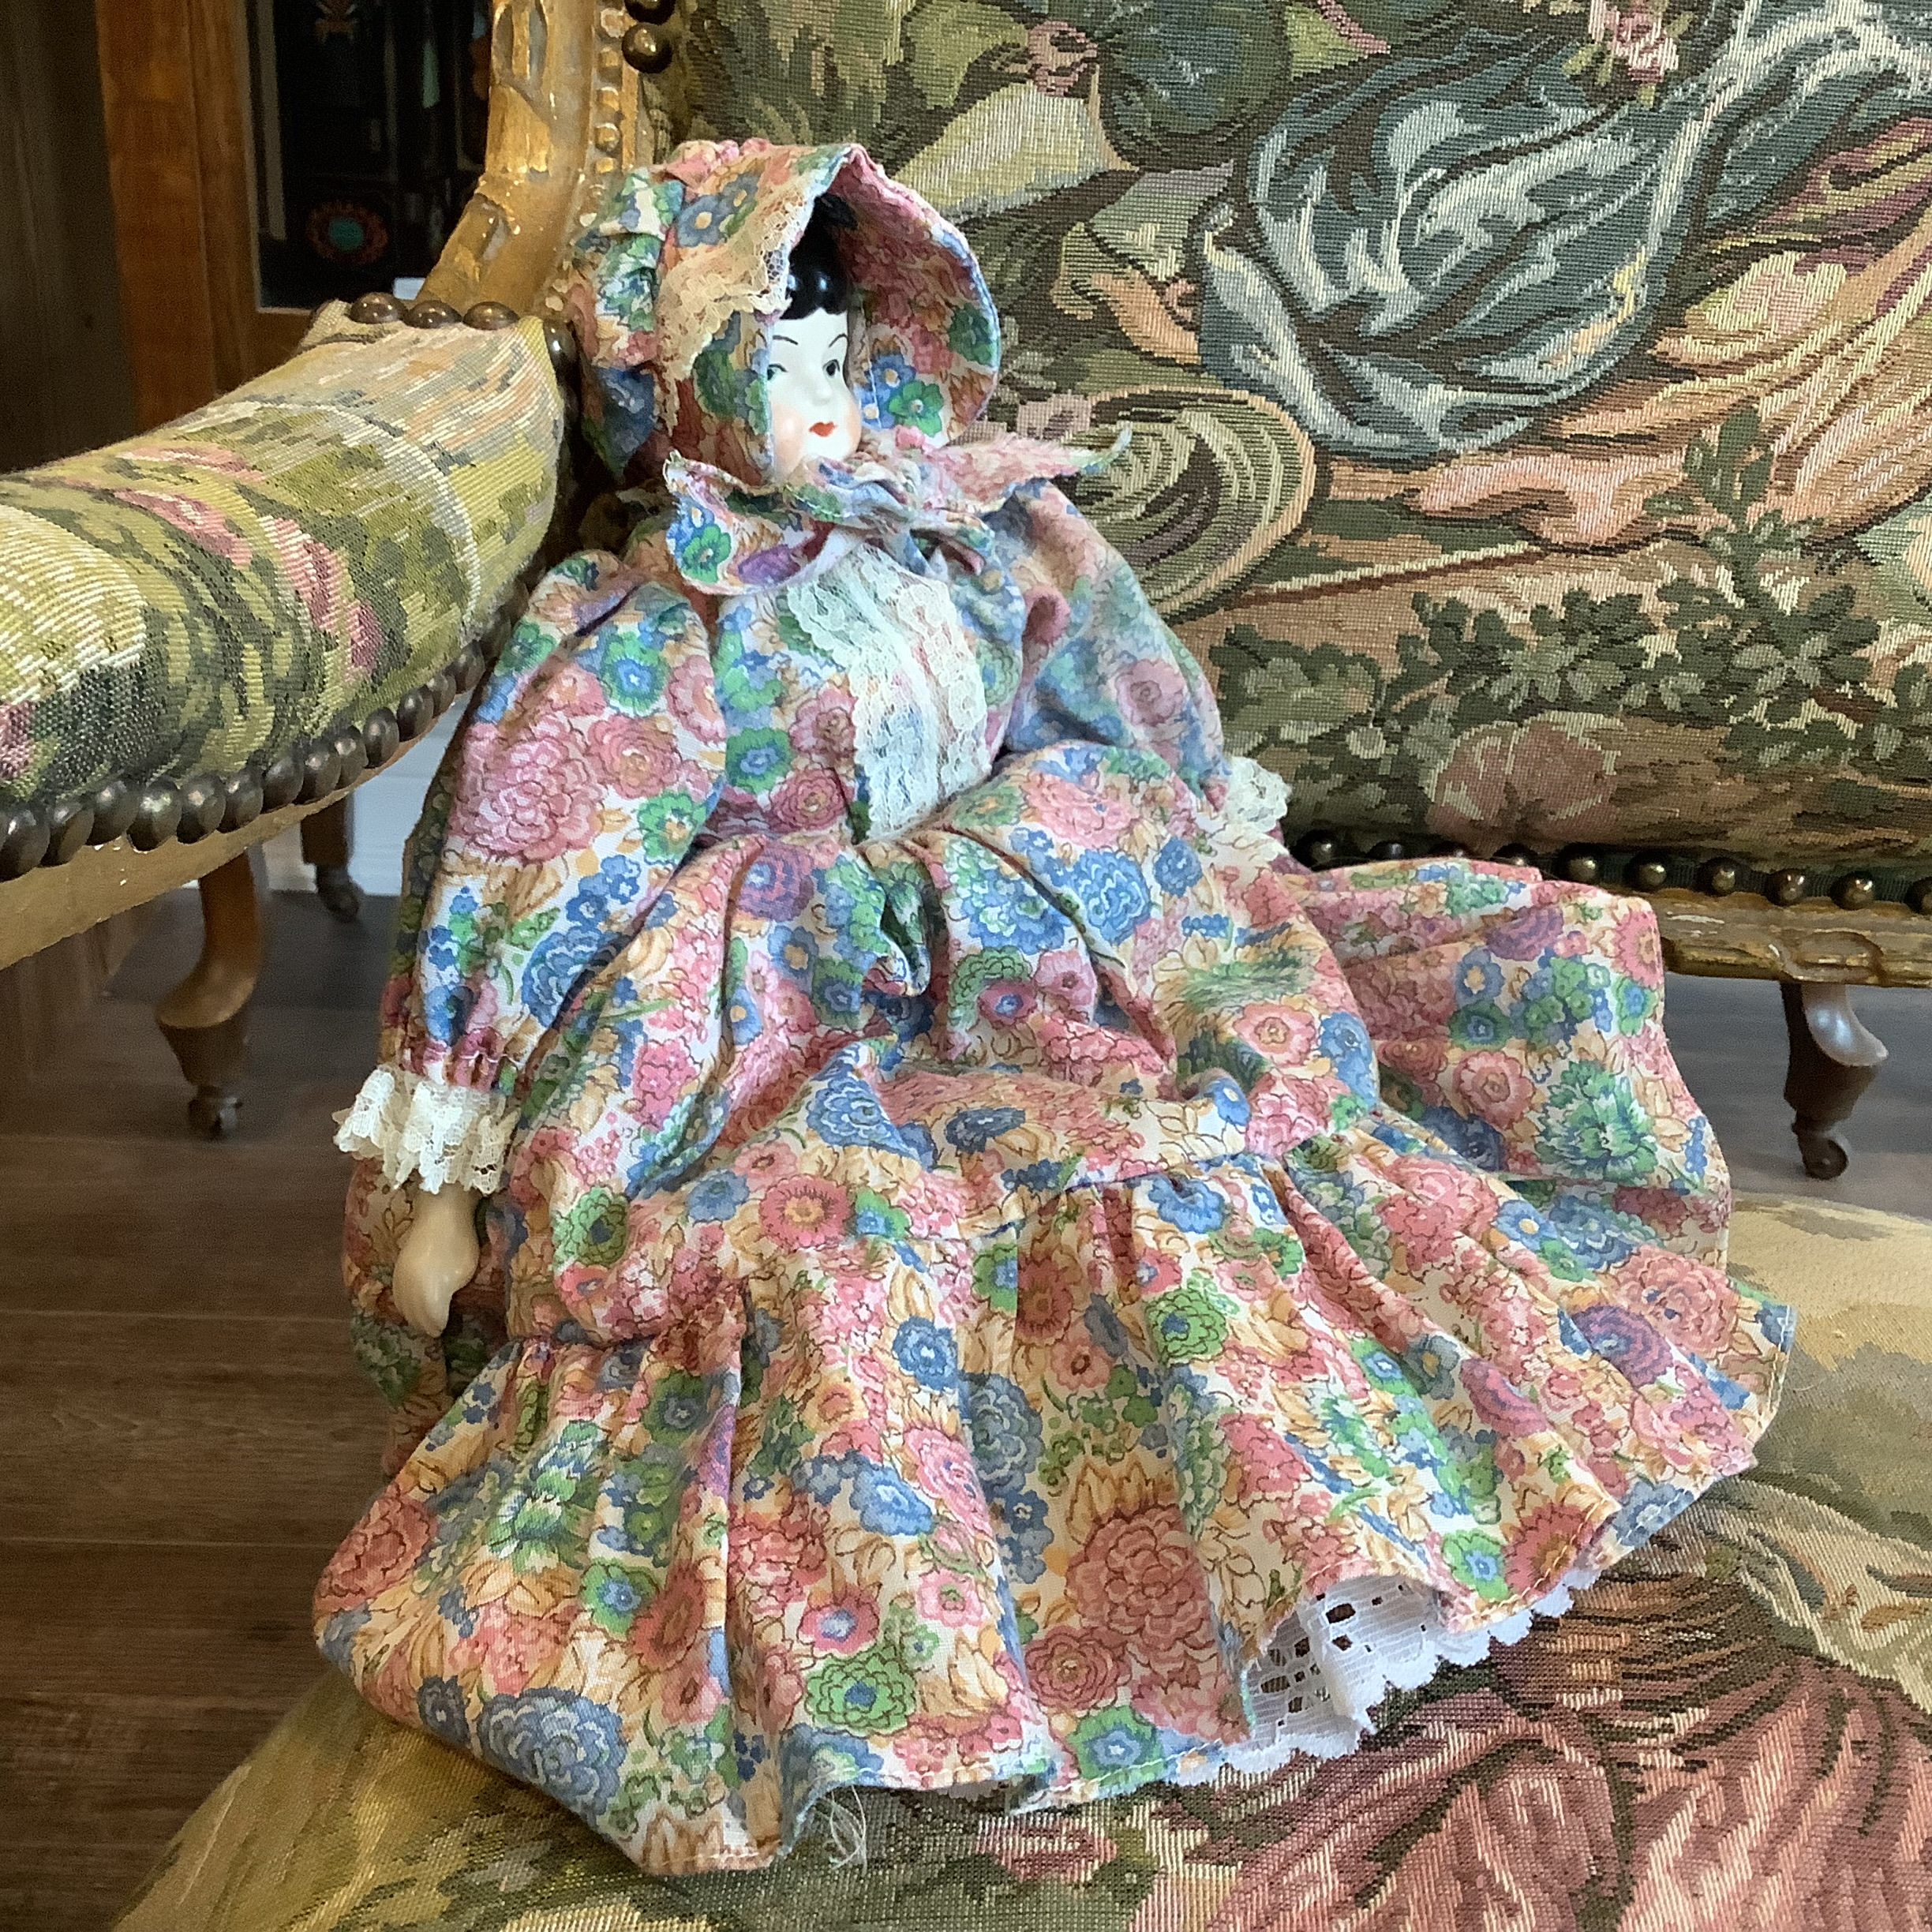 Side view of china doll showing large bonnet that obscures face from the side